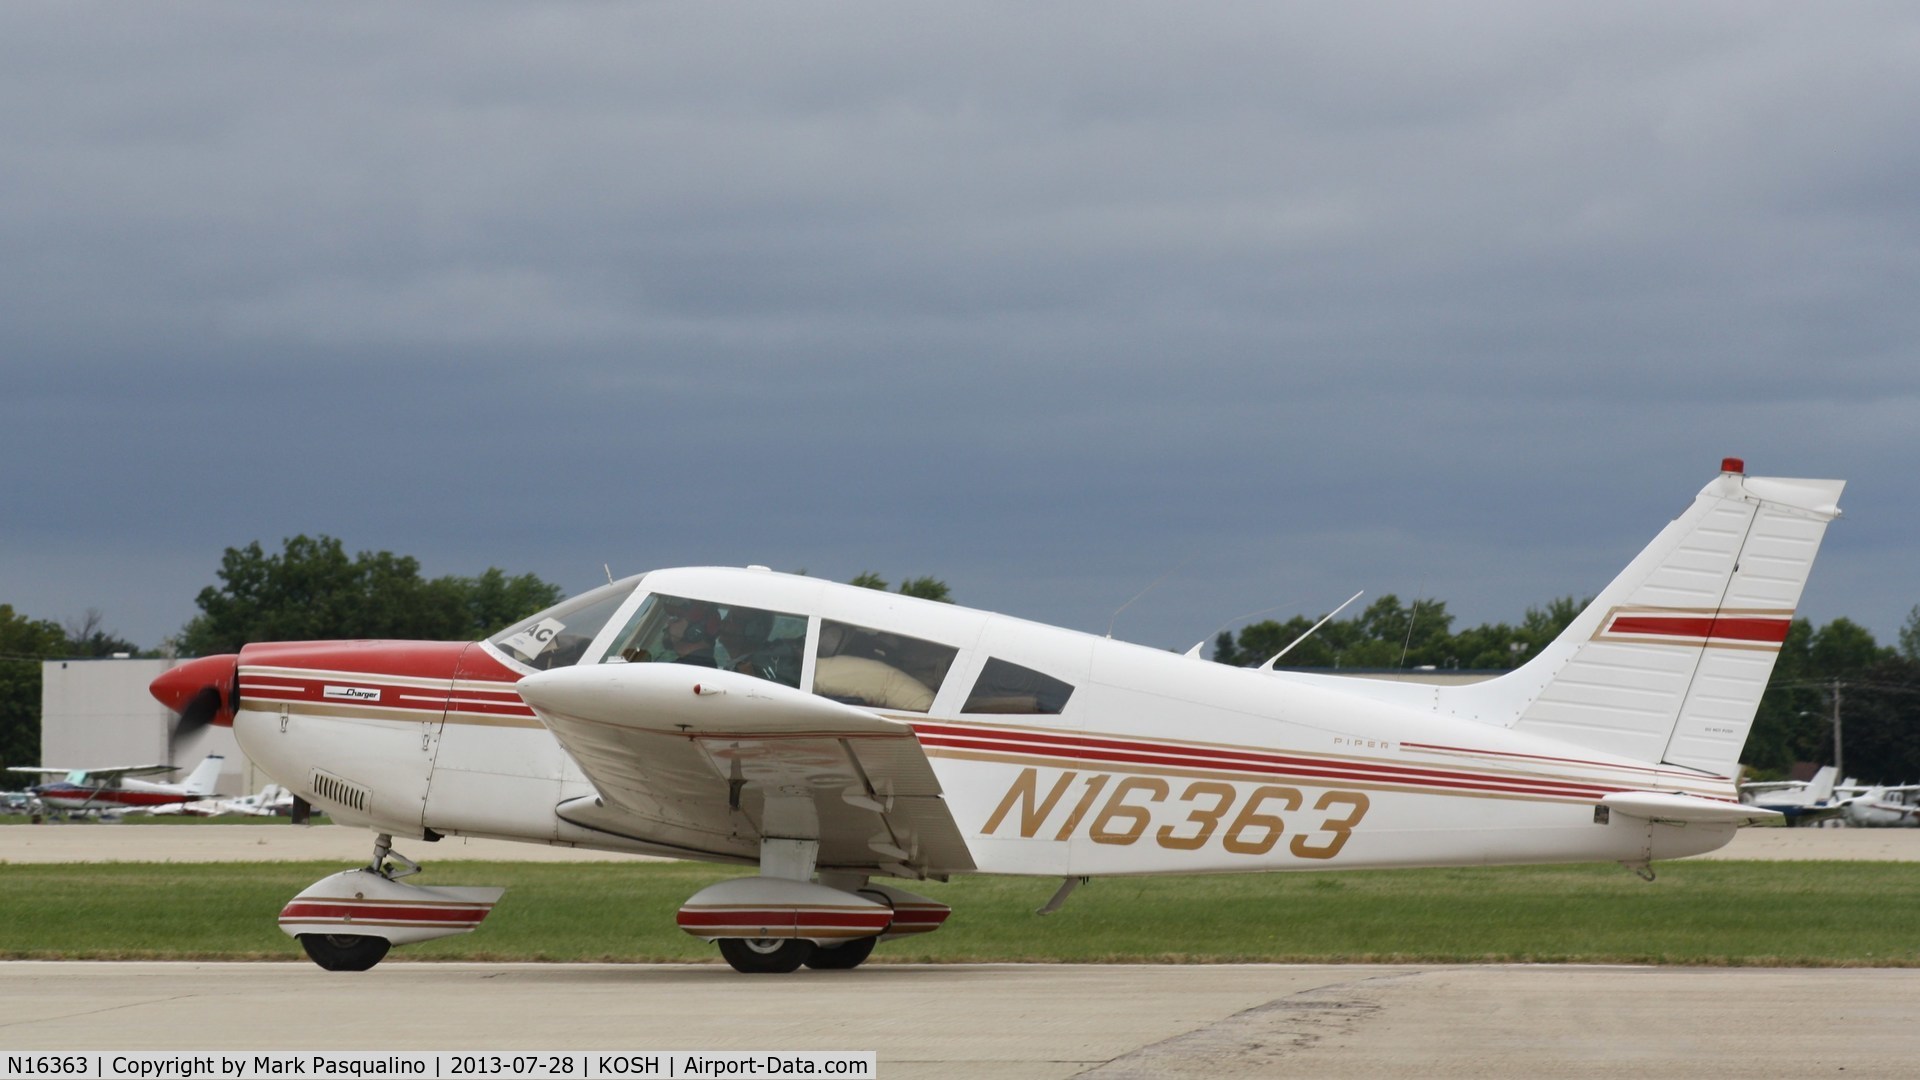 N16363, 1973 Piper PA-28-235 Cherokee Charger C/N 28-7310090, Piper PA-28-235